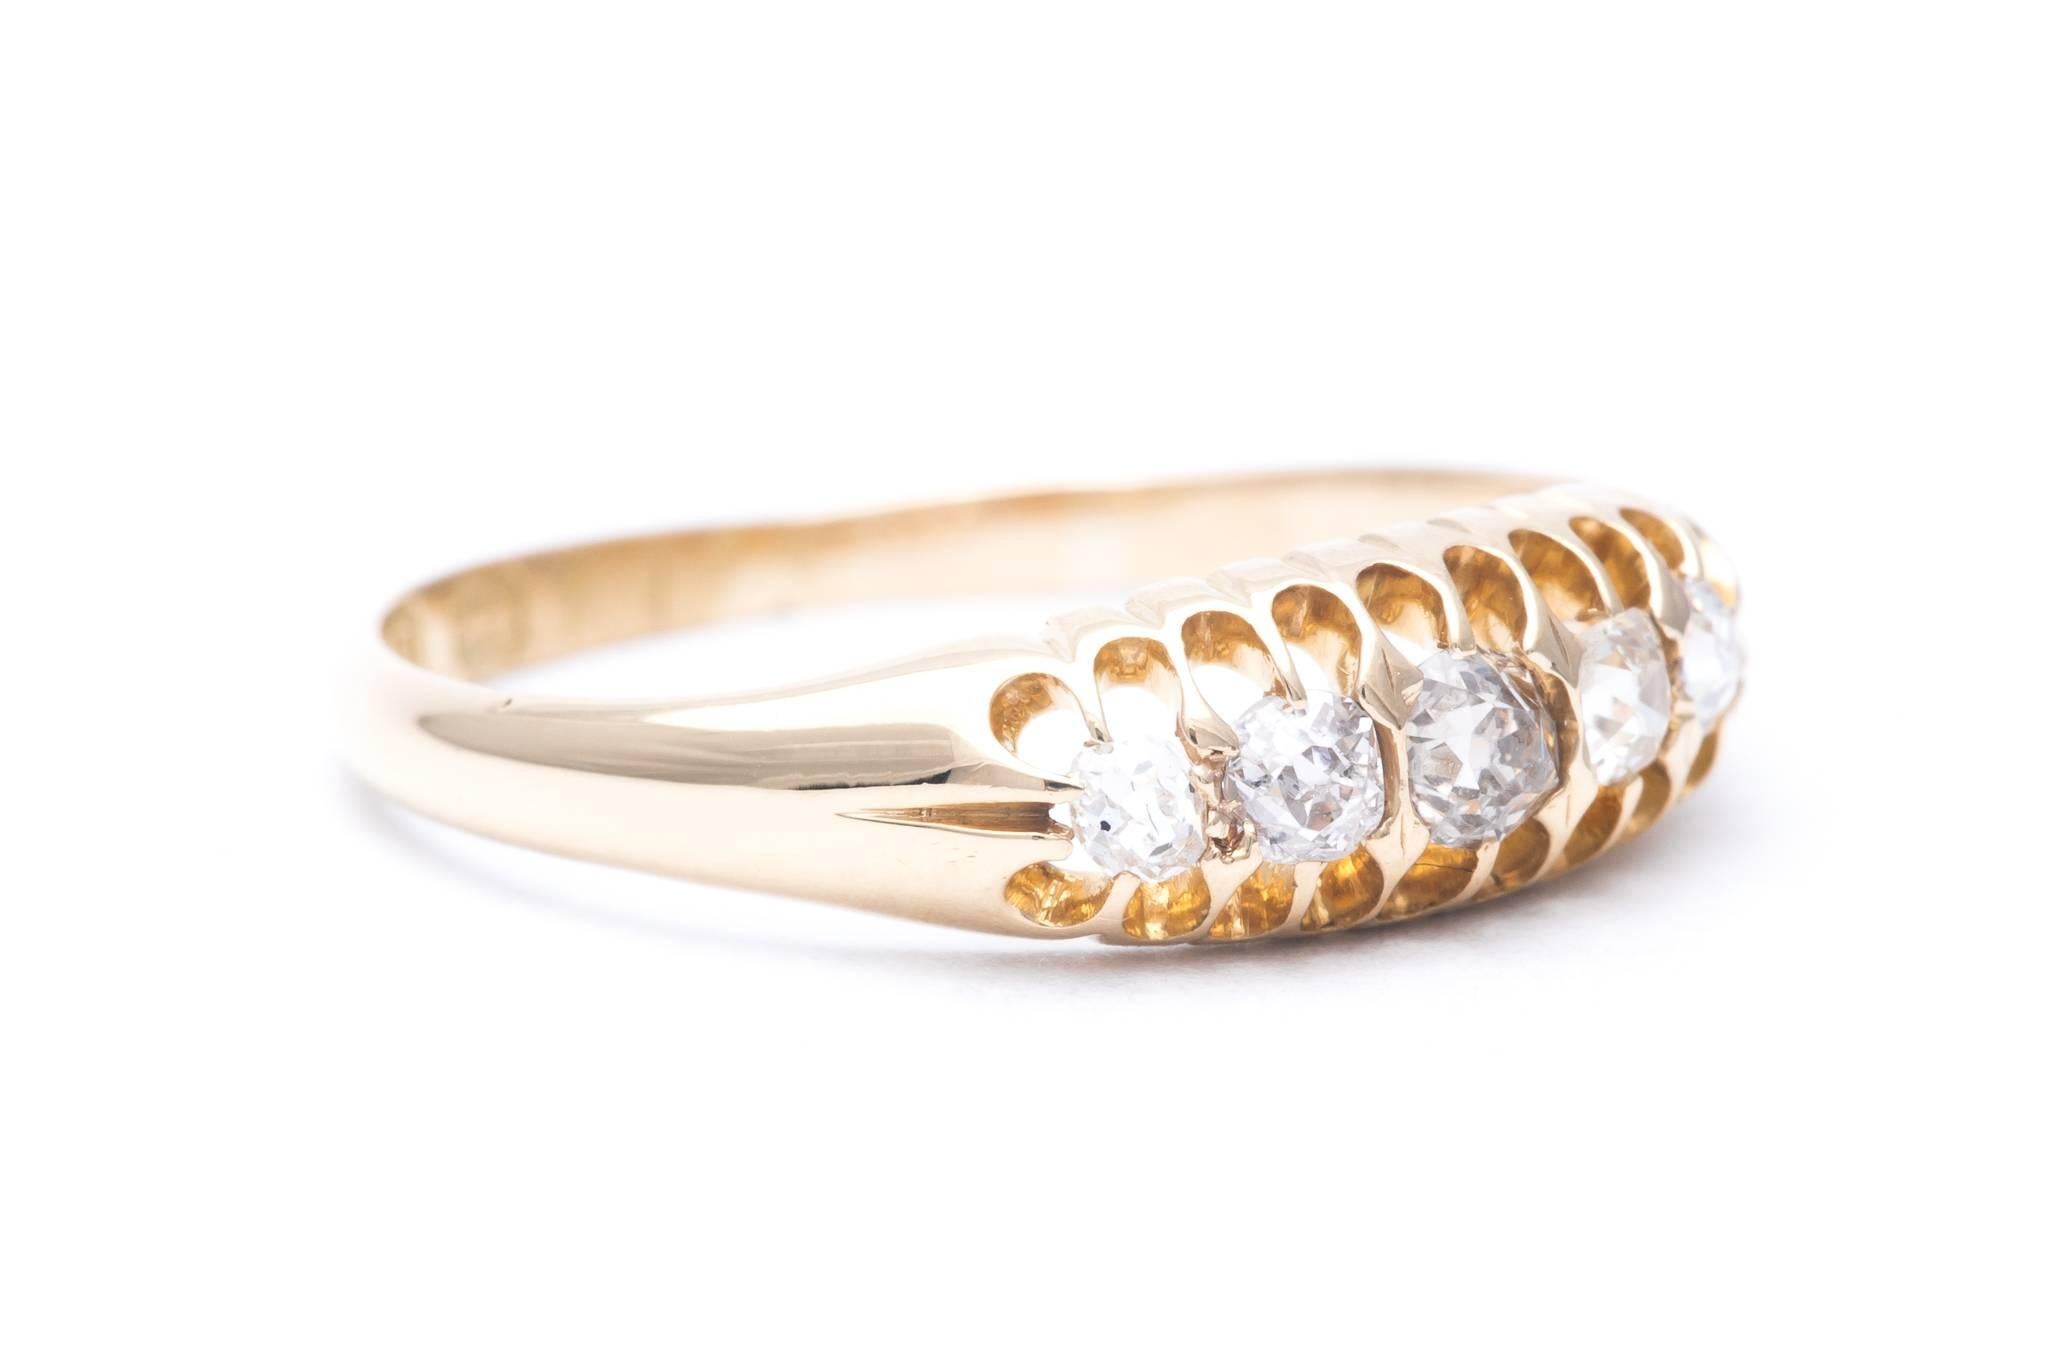 An English made edwardian period diamond wedding band in 18 karat yellow gold.  Hallmarked for Birmingham England, this band features five graduated antique mine cut diamonds weighing a combined 0.33 carats.

In excellent condition, this ring is